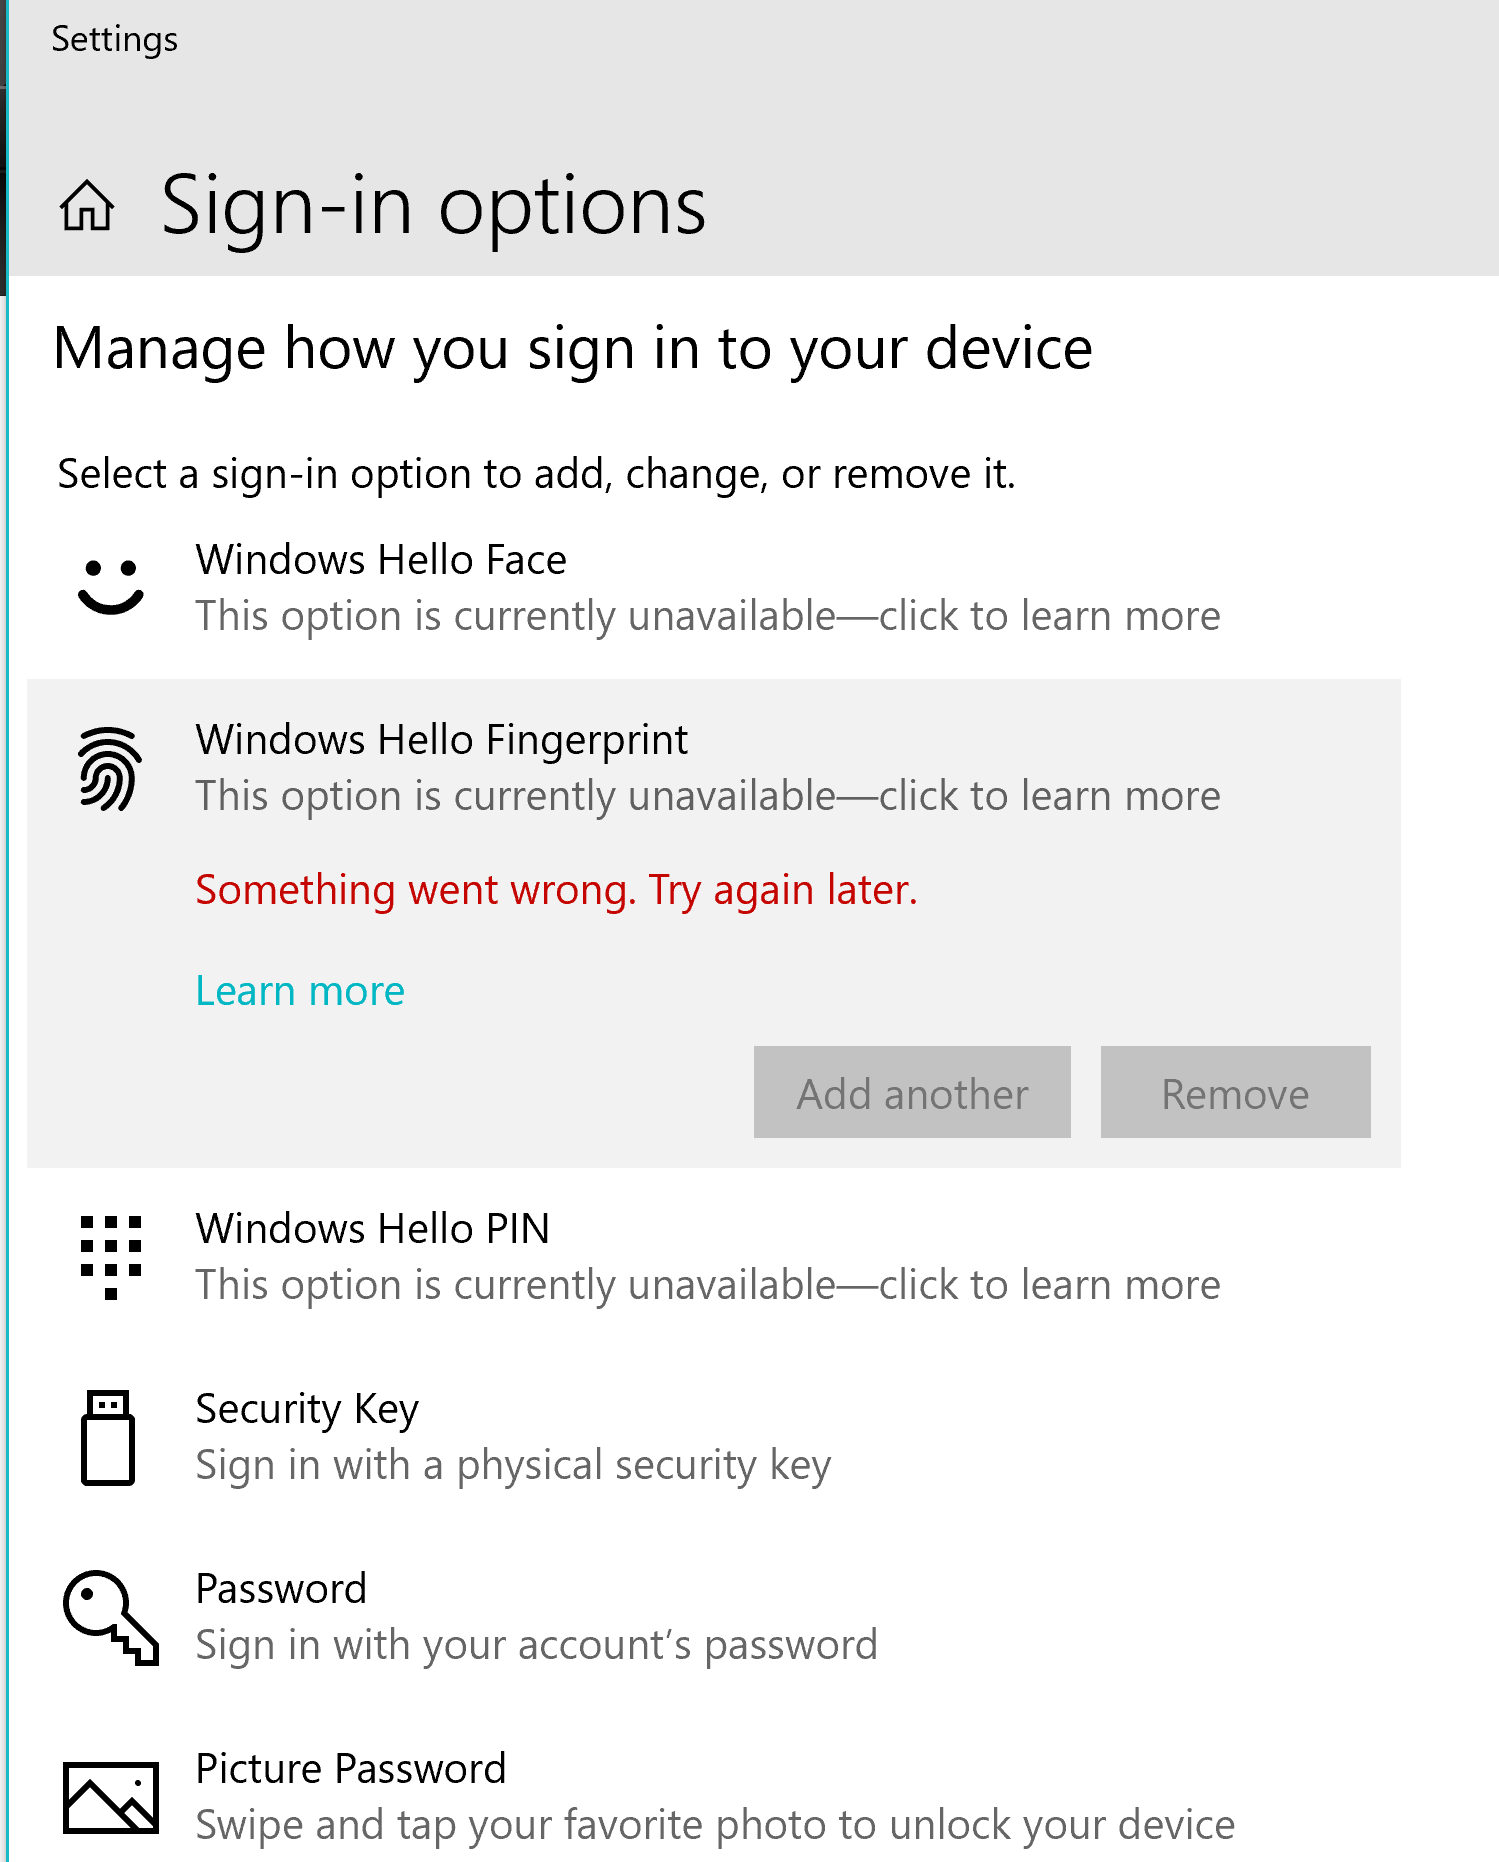 Windows Hello "This option is currently unavailable" ca35db02-ceb5-4208-946c-7e9827d35519?upload=true.png